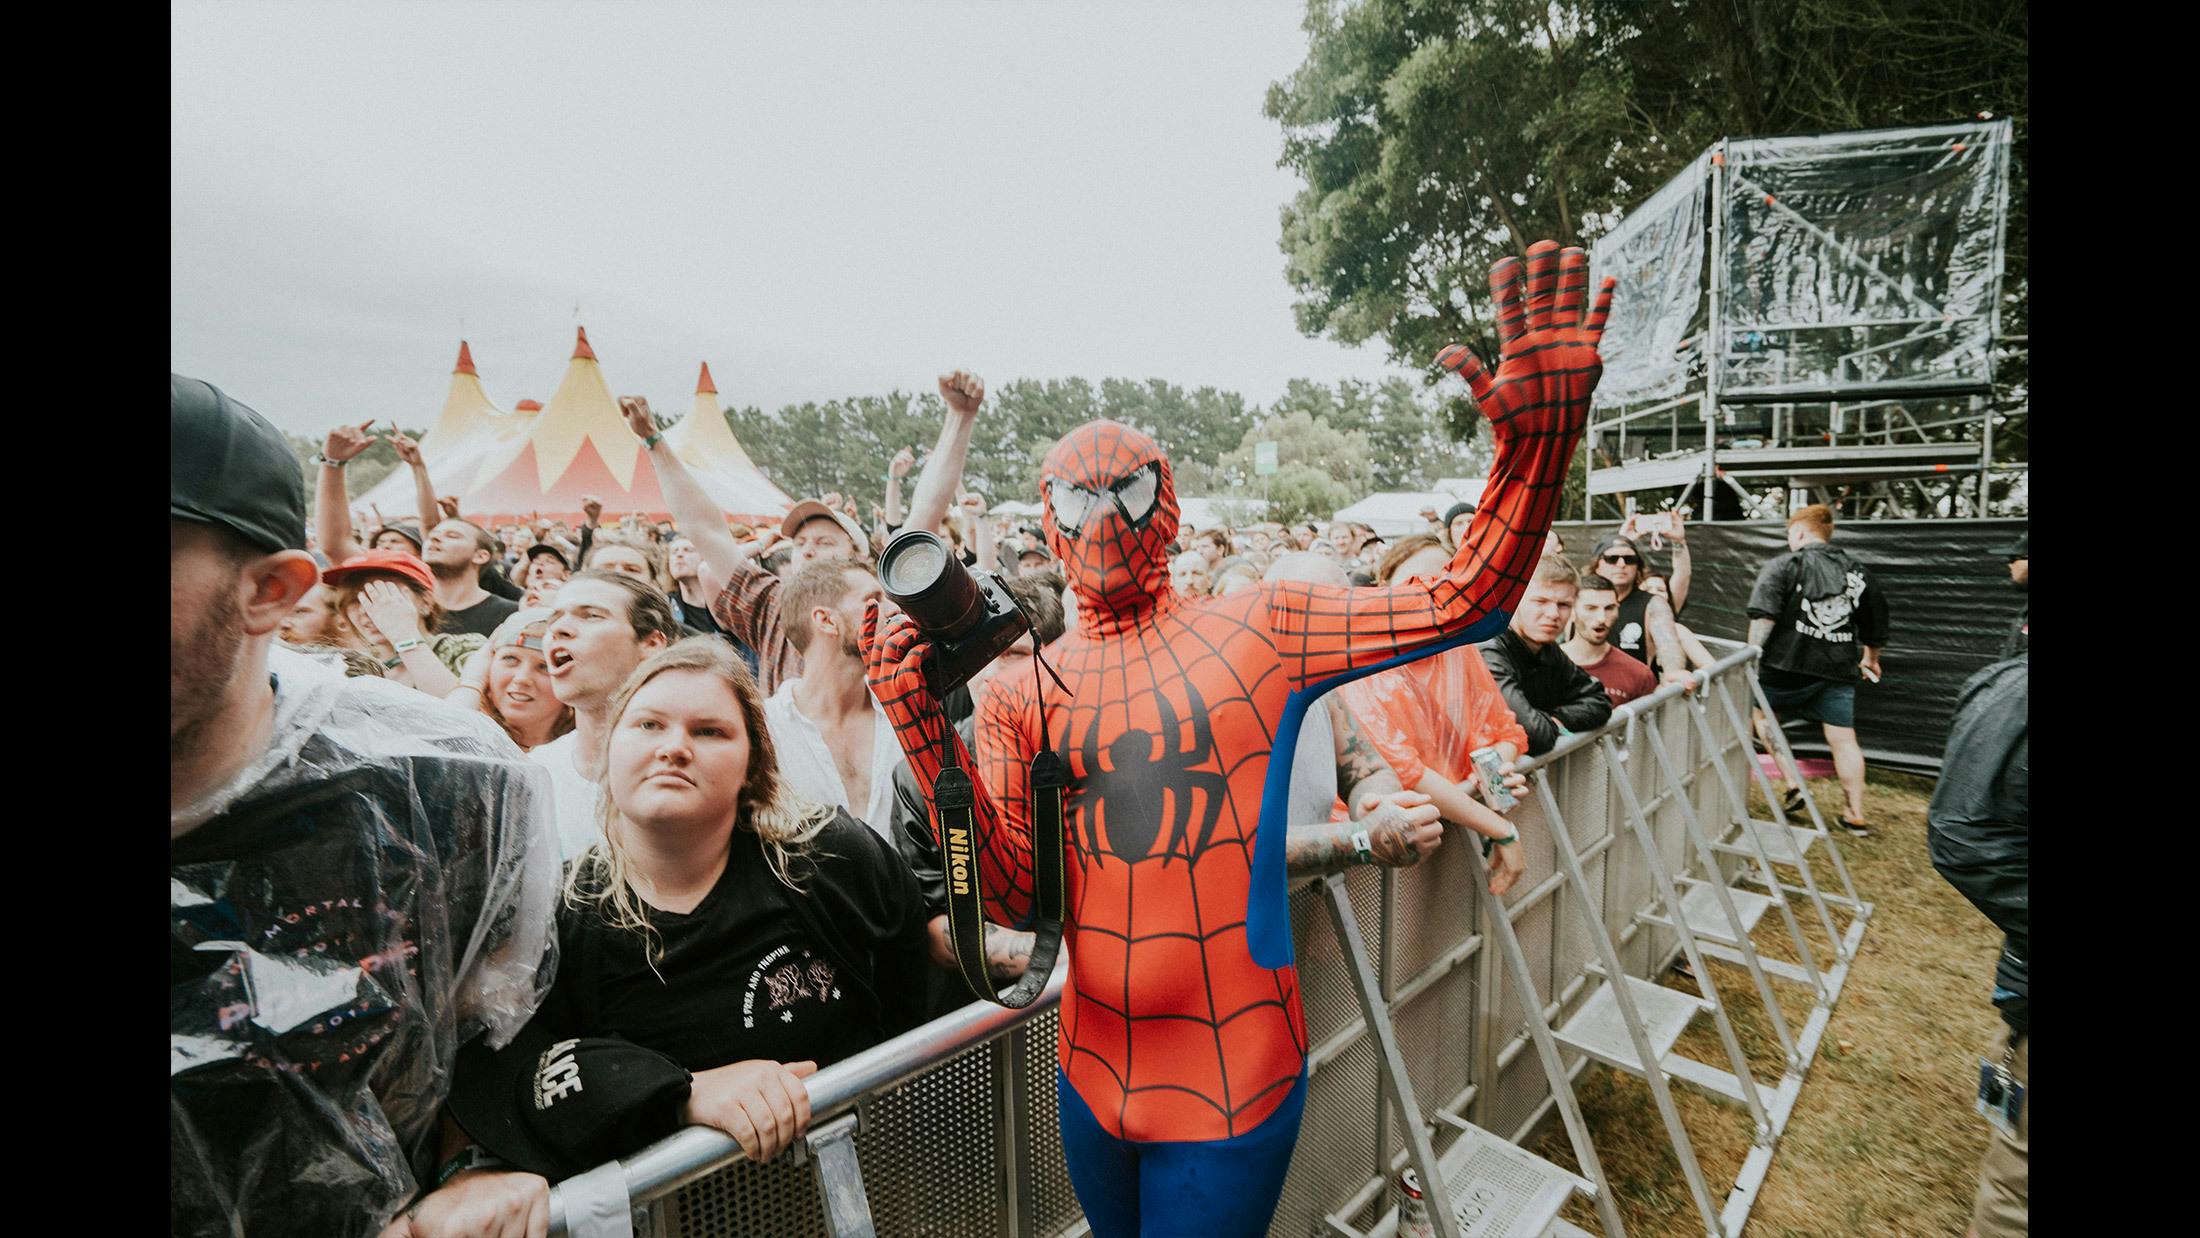 Don't you hate it when you're trying to capture the ultimate festival moment, and Spider-Man comes in and steals your thunder?